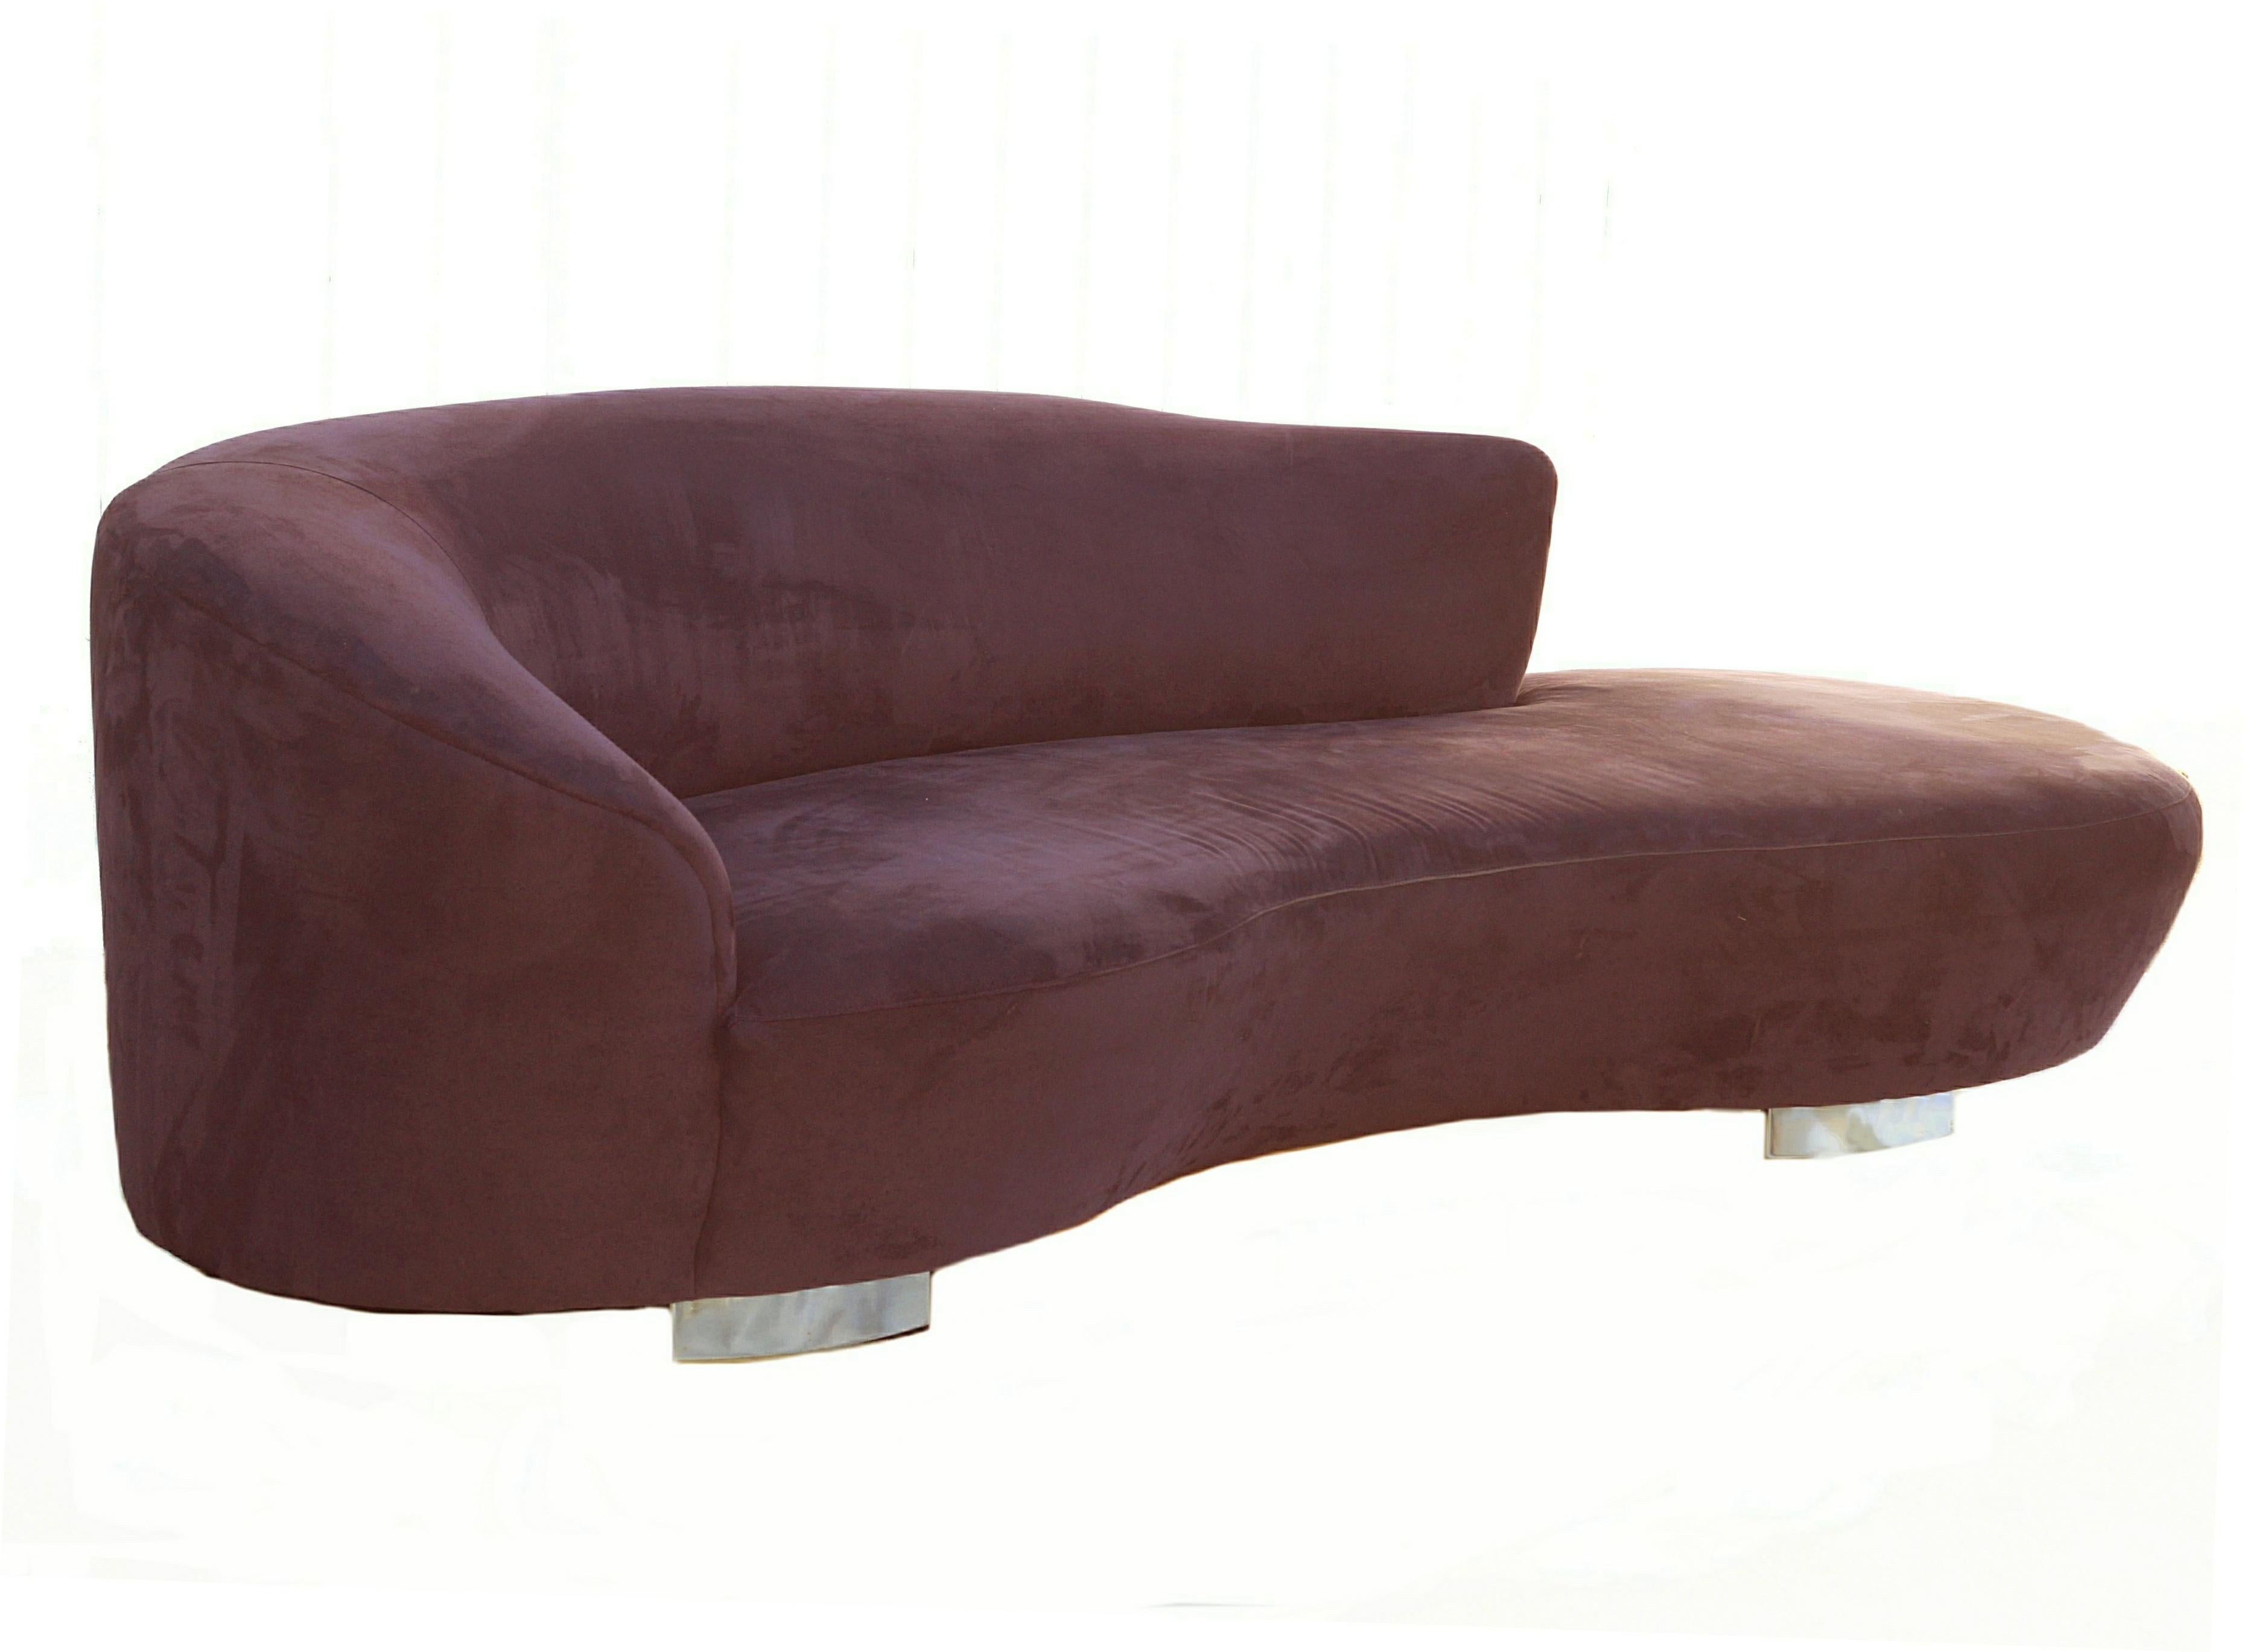 Pair of matching Vladimir Kagan Cloud Sofas. Purple in color. Photos were taken in different lighting conditions, so are showing differently in color, because of it. Lighter was in sunlight. You may purchase 1 or both. Price is for a single sofa.